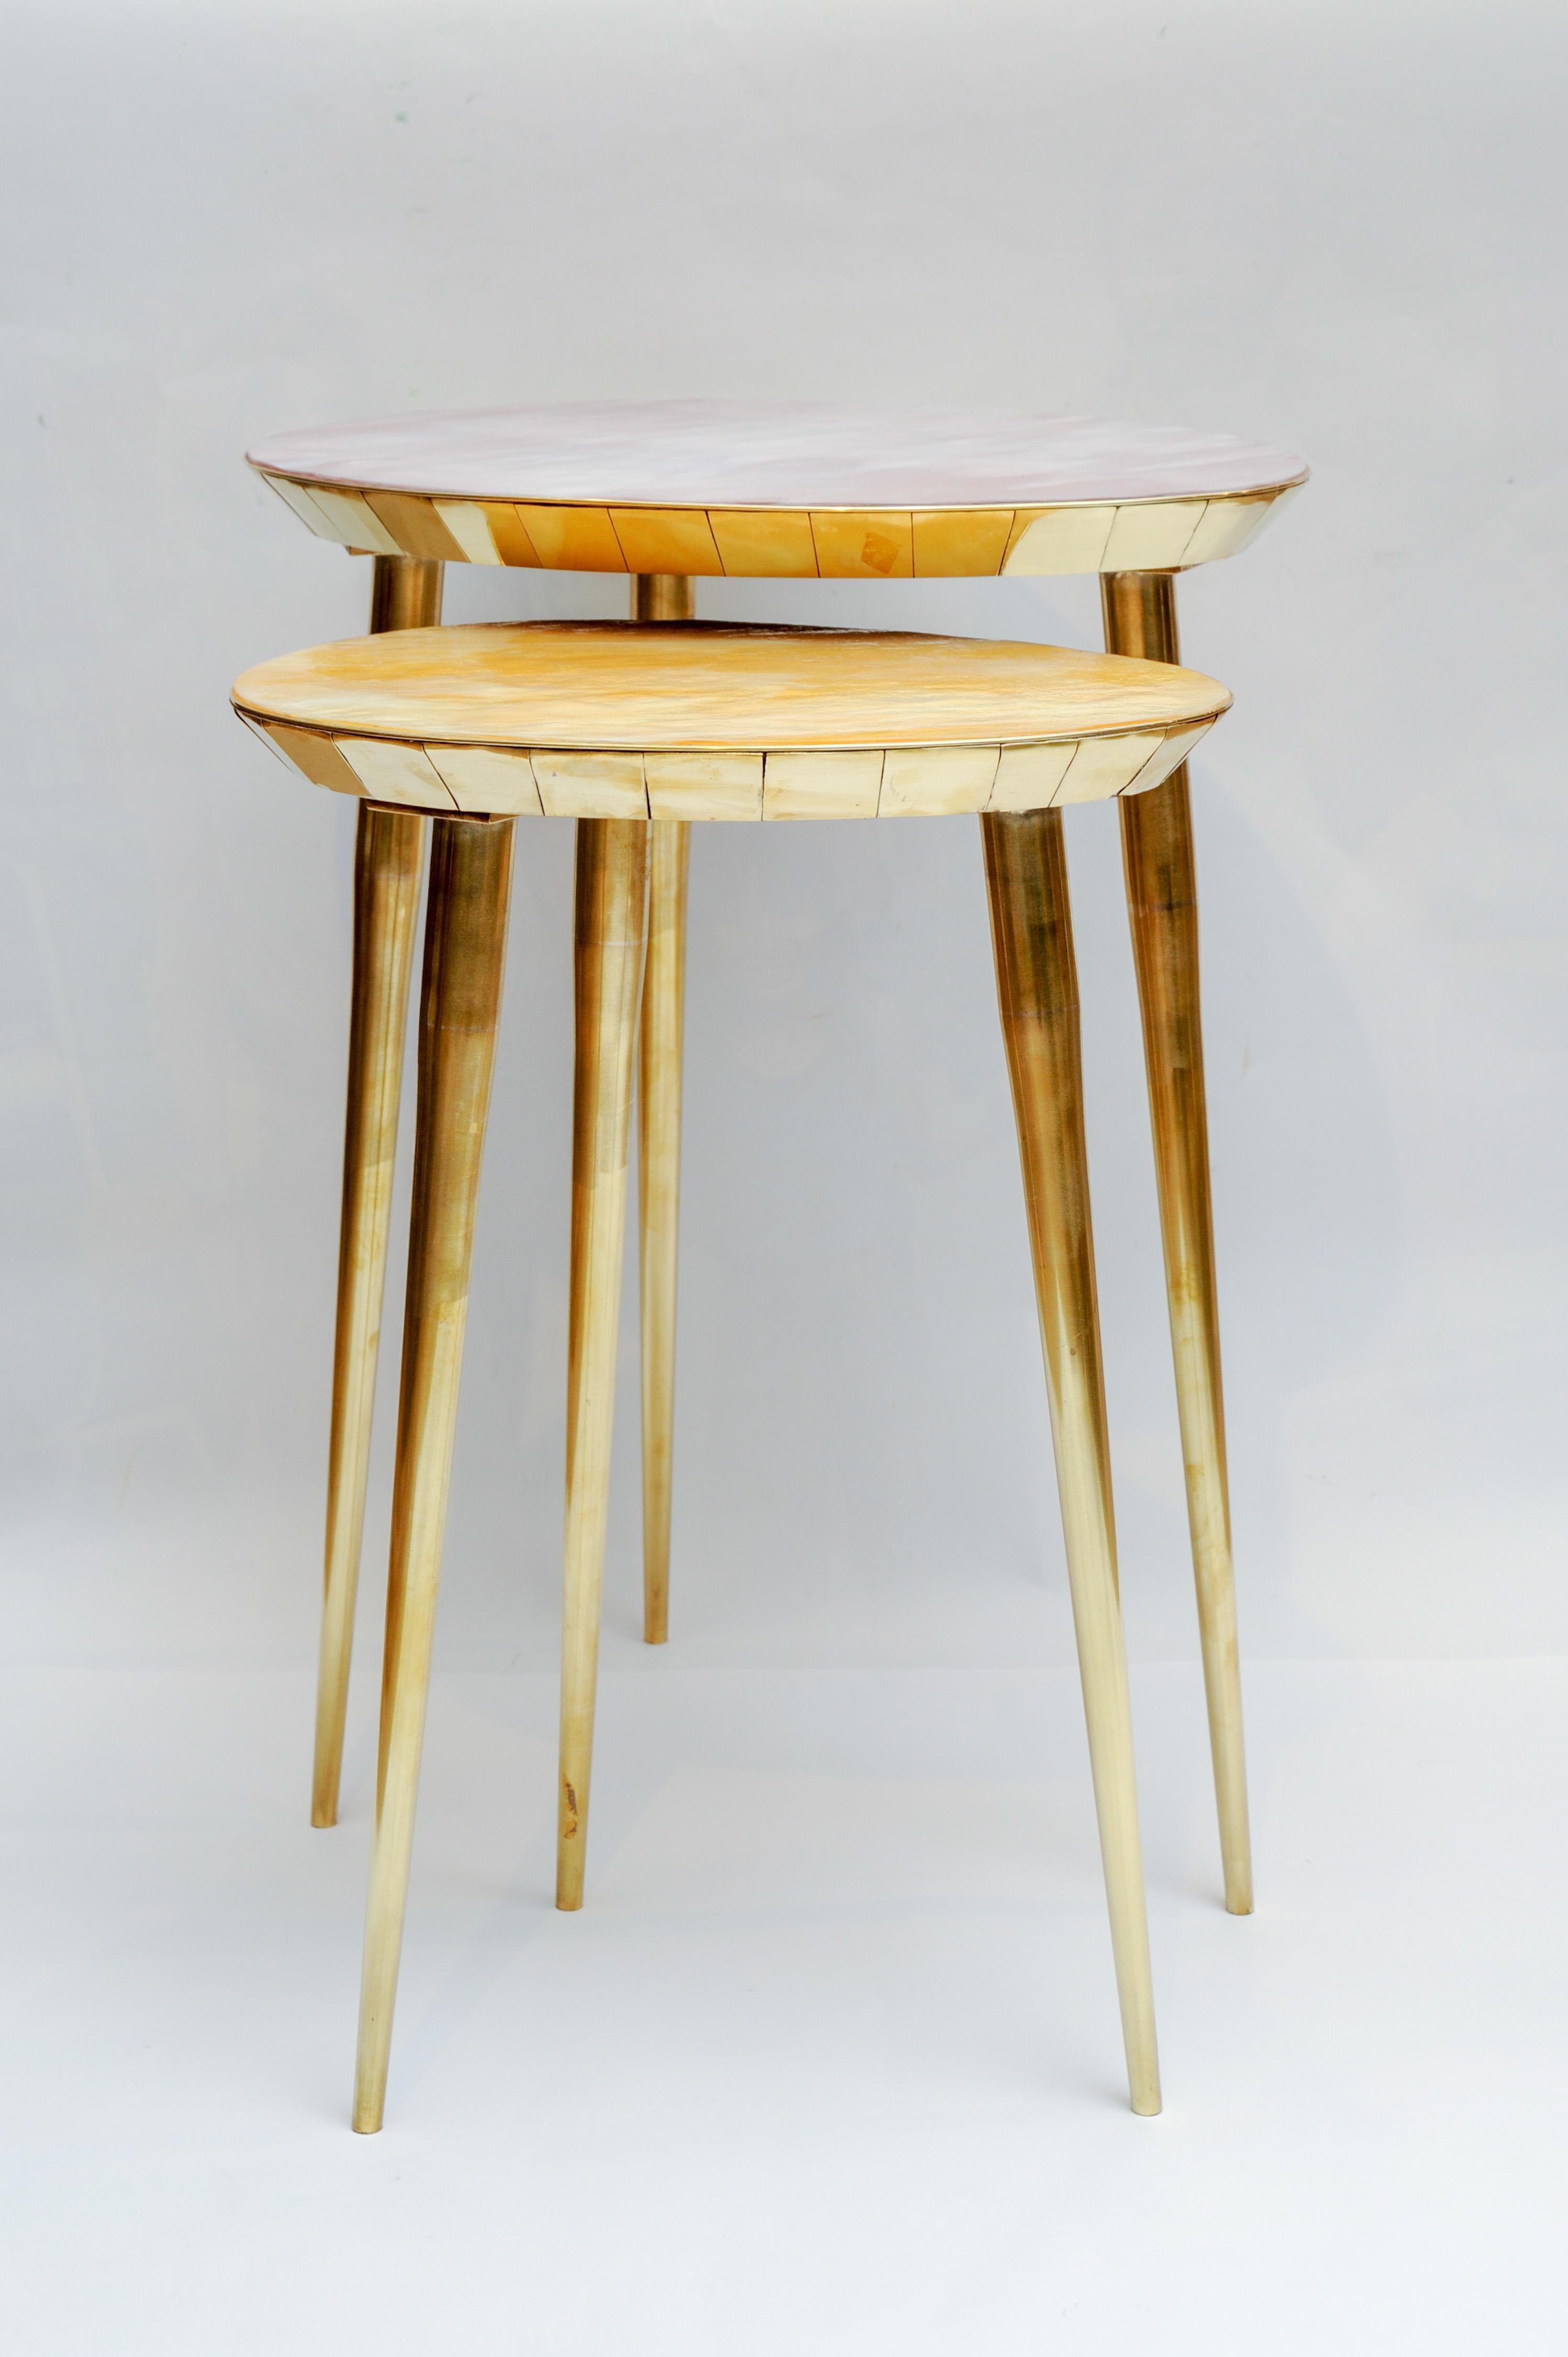 This pair of beautiful pedestal tables are made of brass, with tops in old painted mirrors from Italy. Customizable dimensions, Creation Studio Glustin.
Measures: 50 x 40 x H 66 cm
40 x 30 x 60 cm.